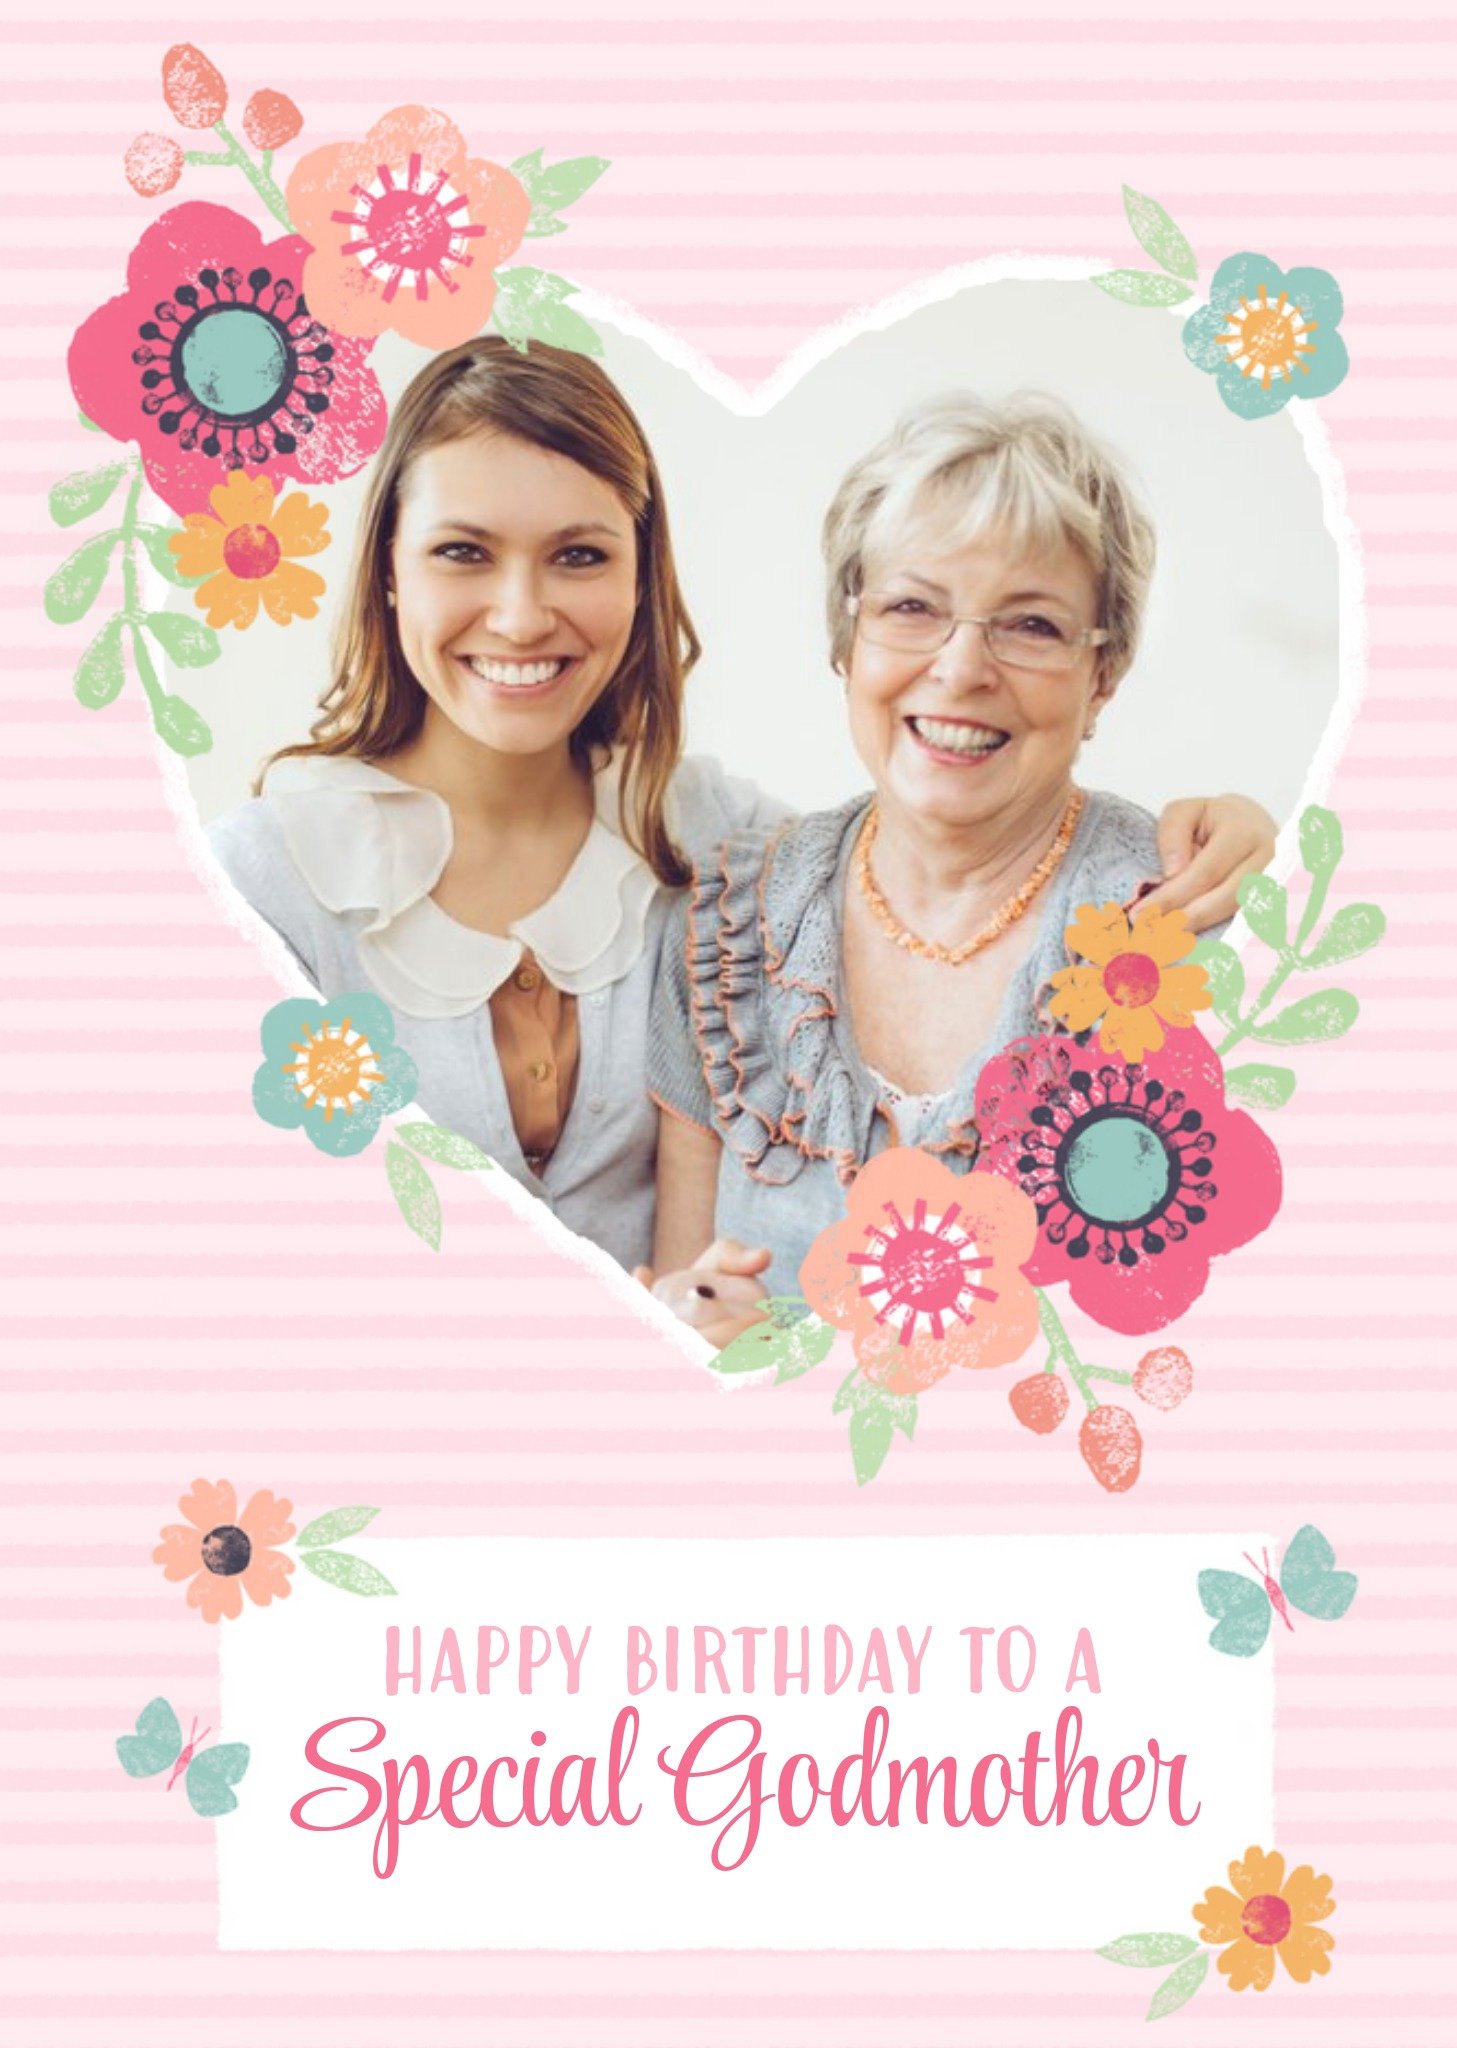 Moonpig Striped And Flower Design Happy Birthday Godmother Photo Card, Large